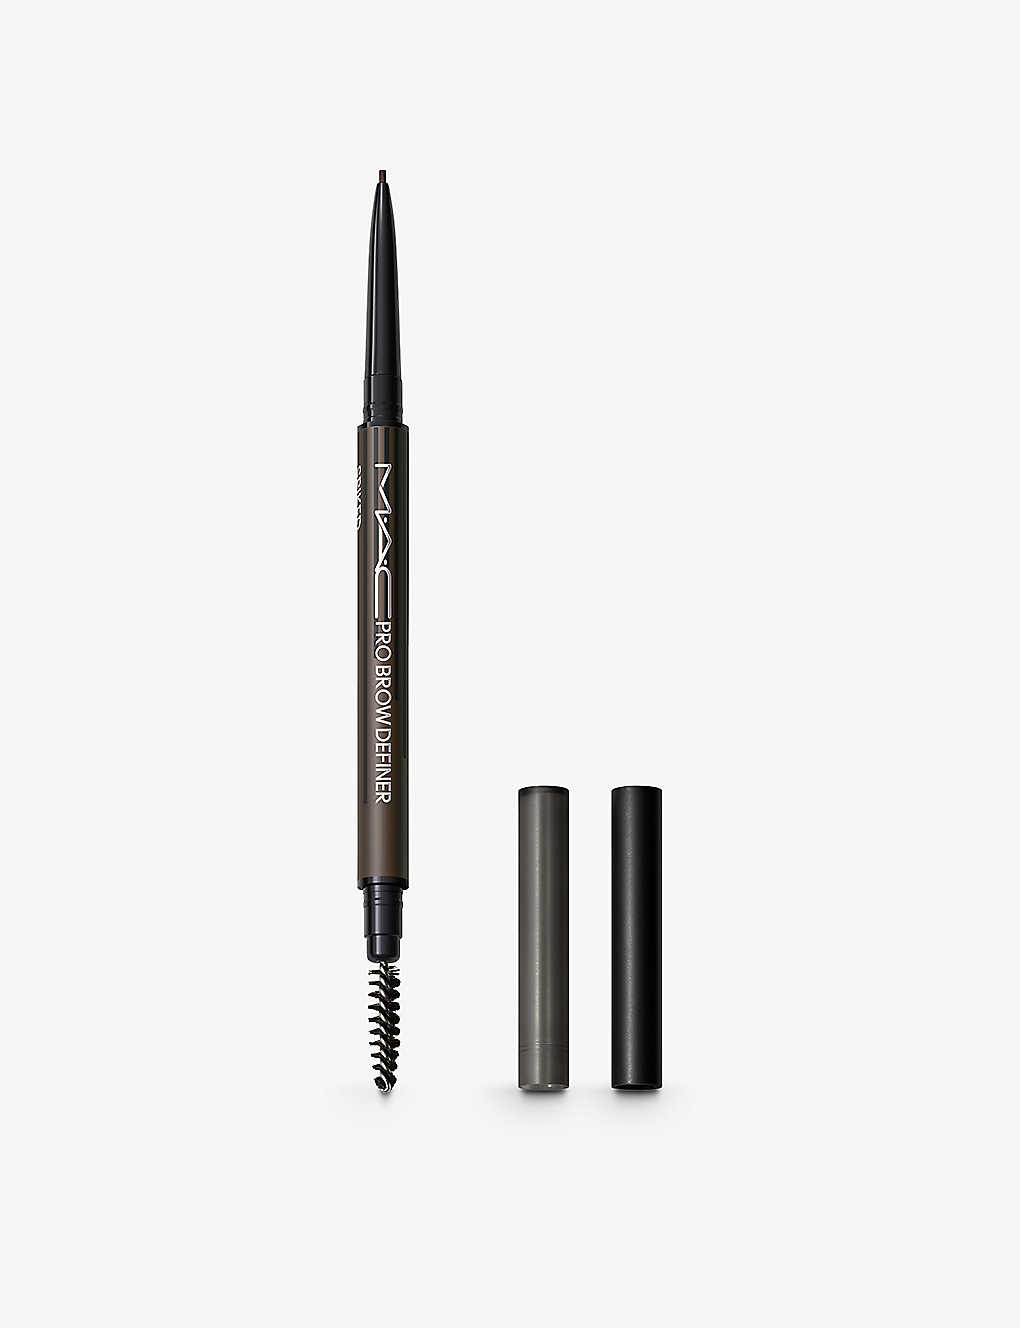 Mac Spiked Pro Brow Definer Eyebrow Pencil 0.03g In White